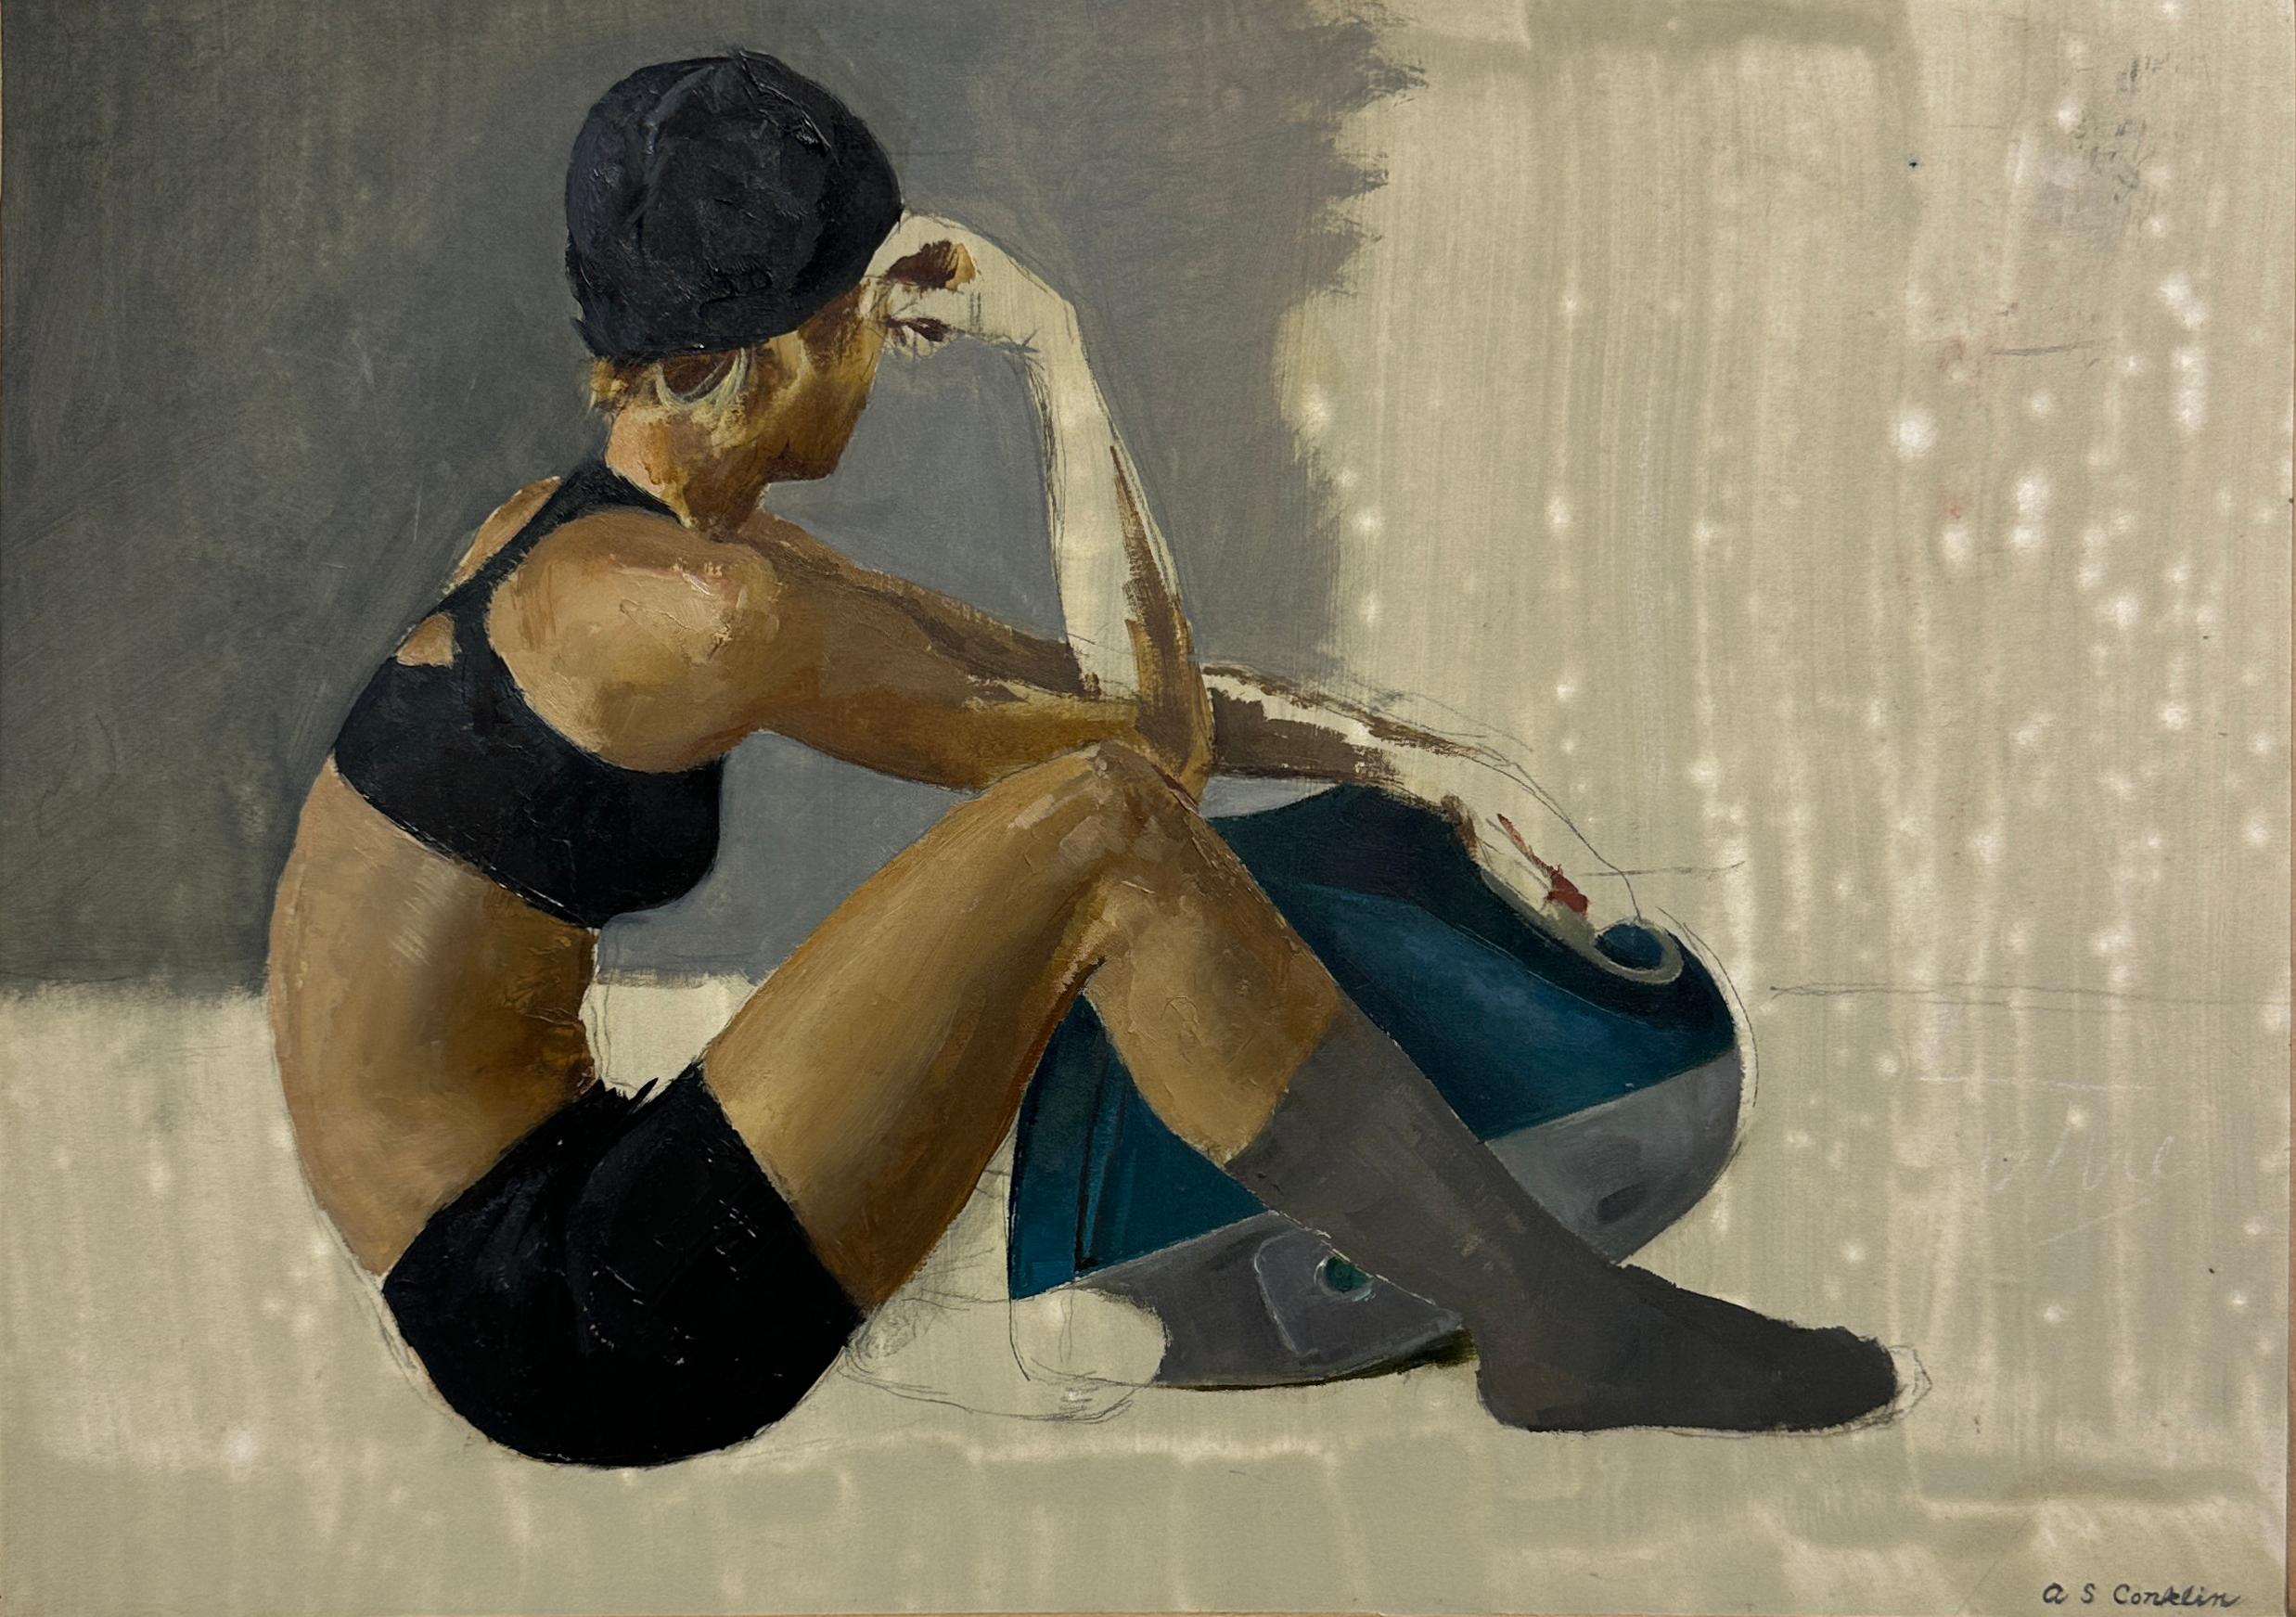 Andrew S. Conklin Figurative Painting - Kelsey Seated, Arm on Mac - Original Oil Painting, Study of a Dancer